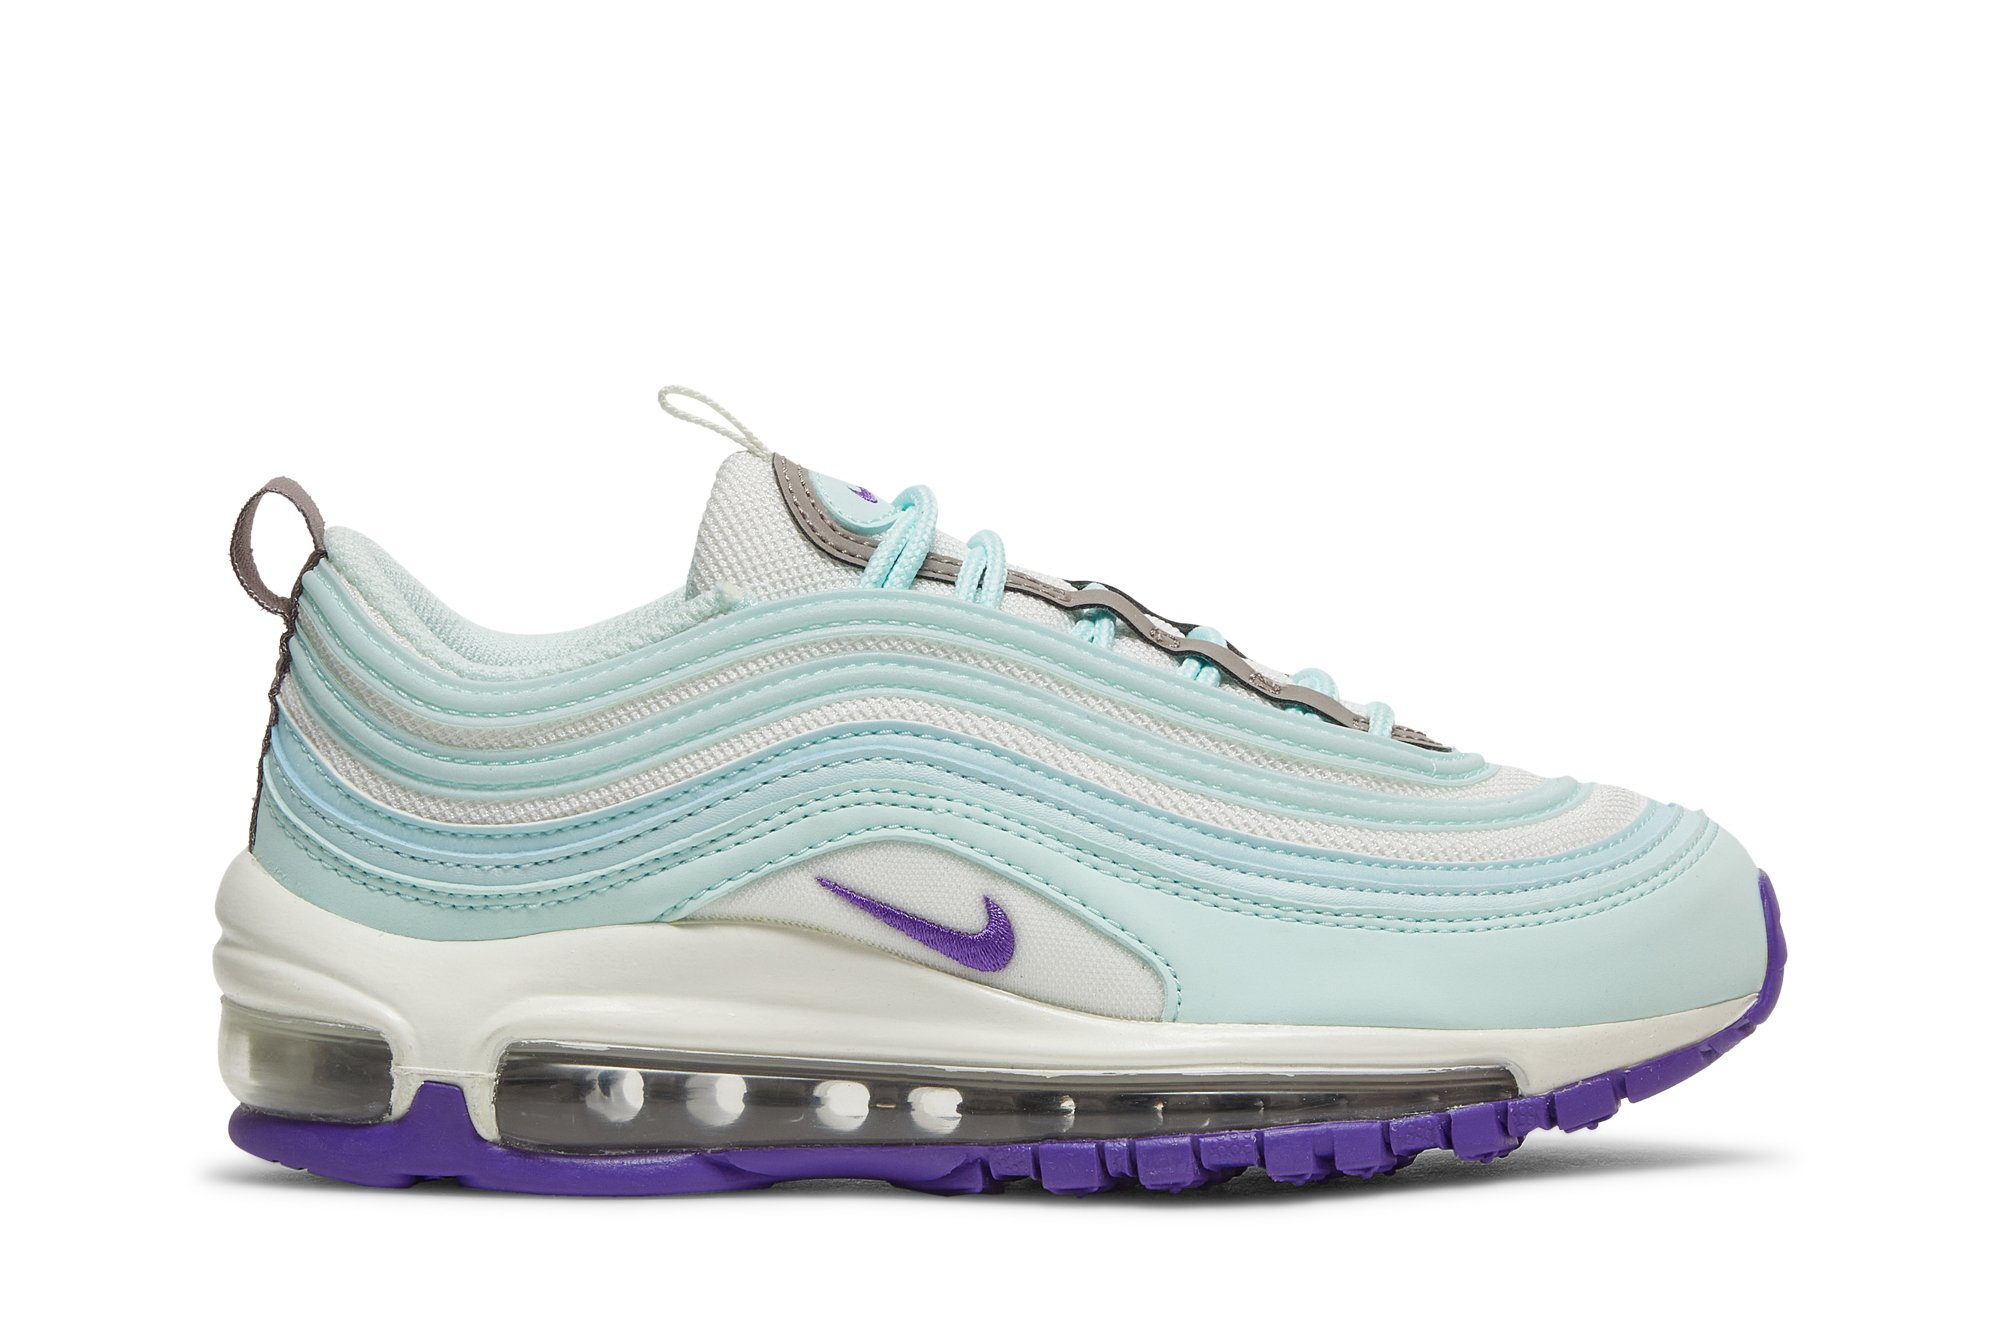 teal and white air max 97